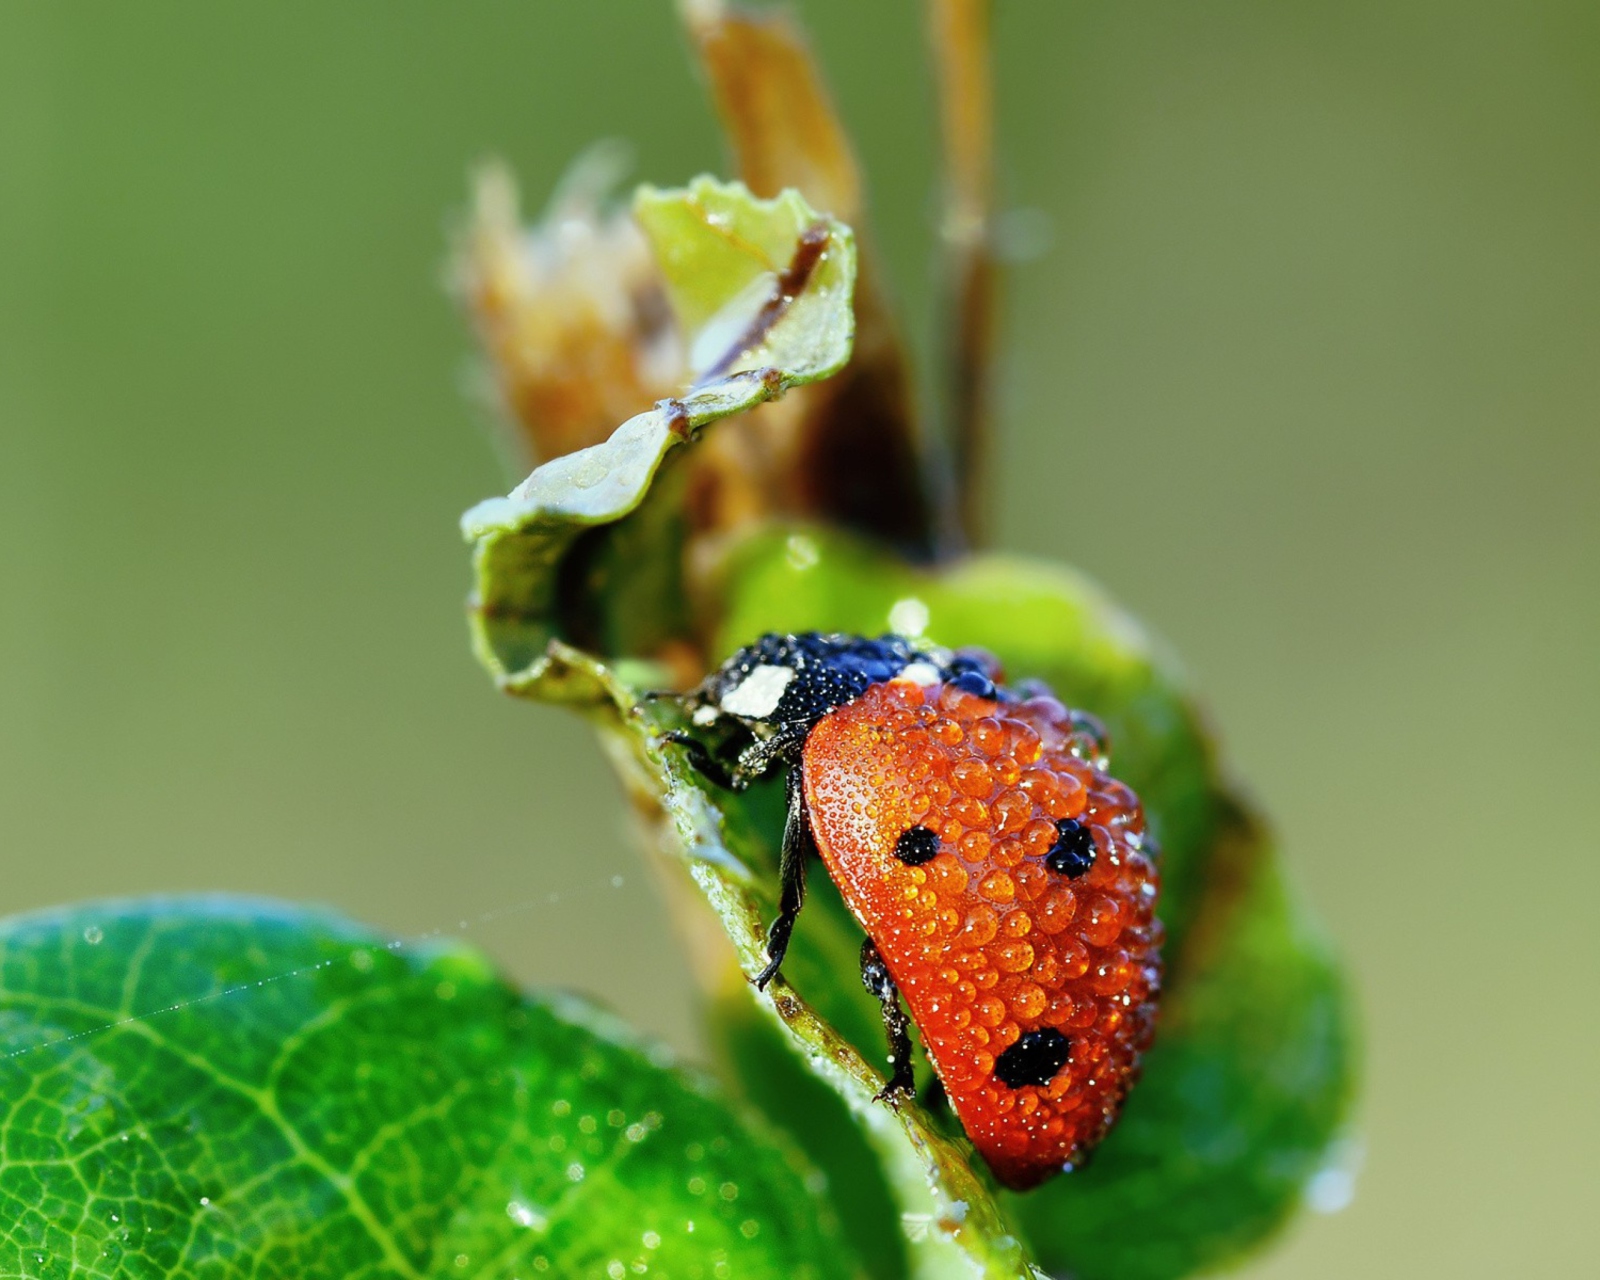 Ladybug Covered With Dew Drops wallpaper 1600x1280